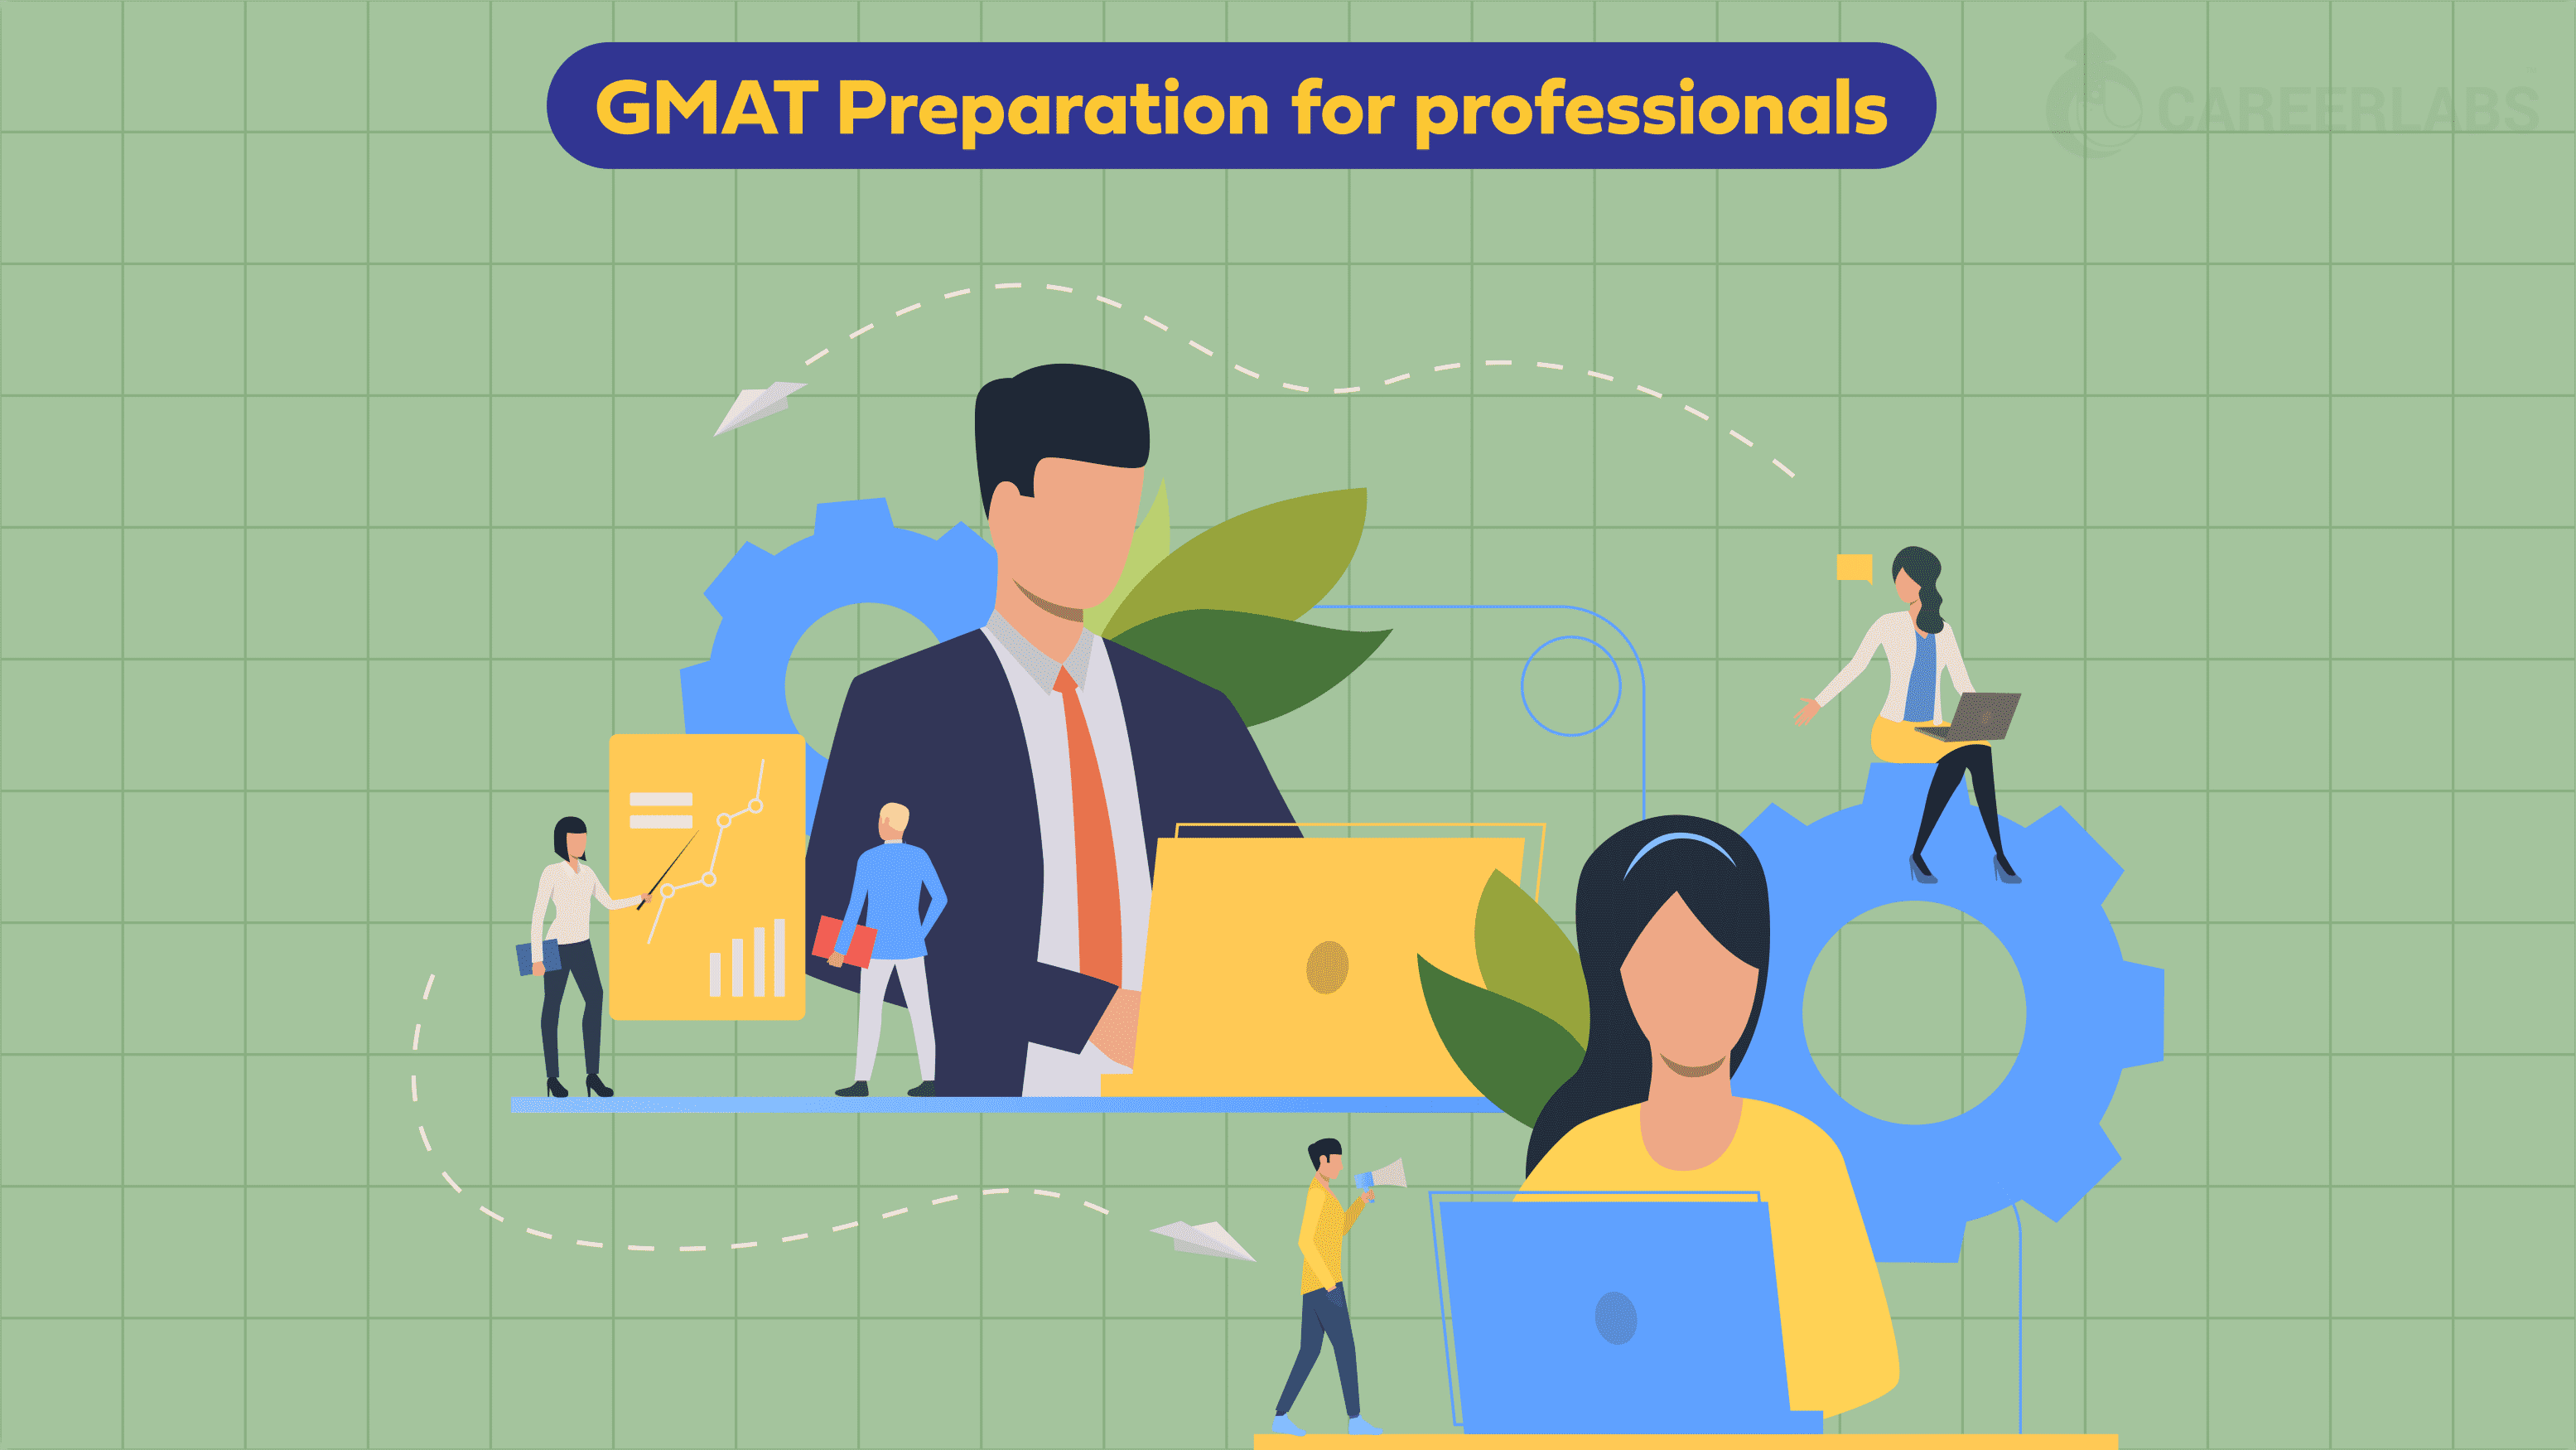 GMAT Preparation Tips for Professionals